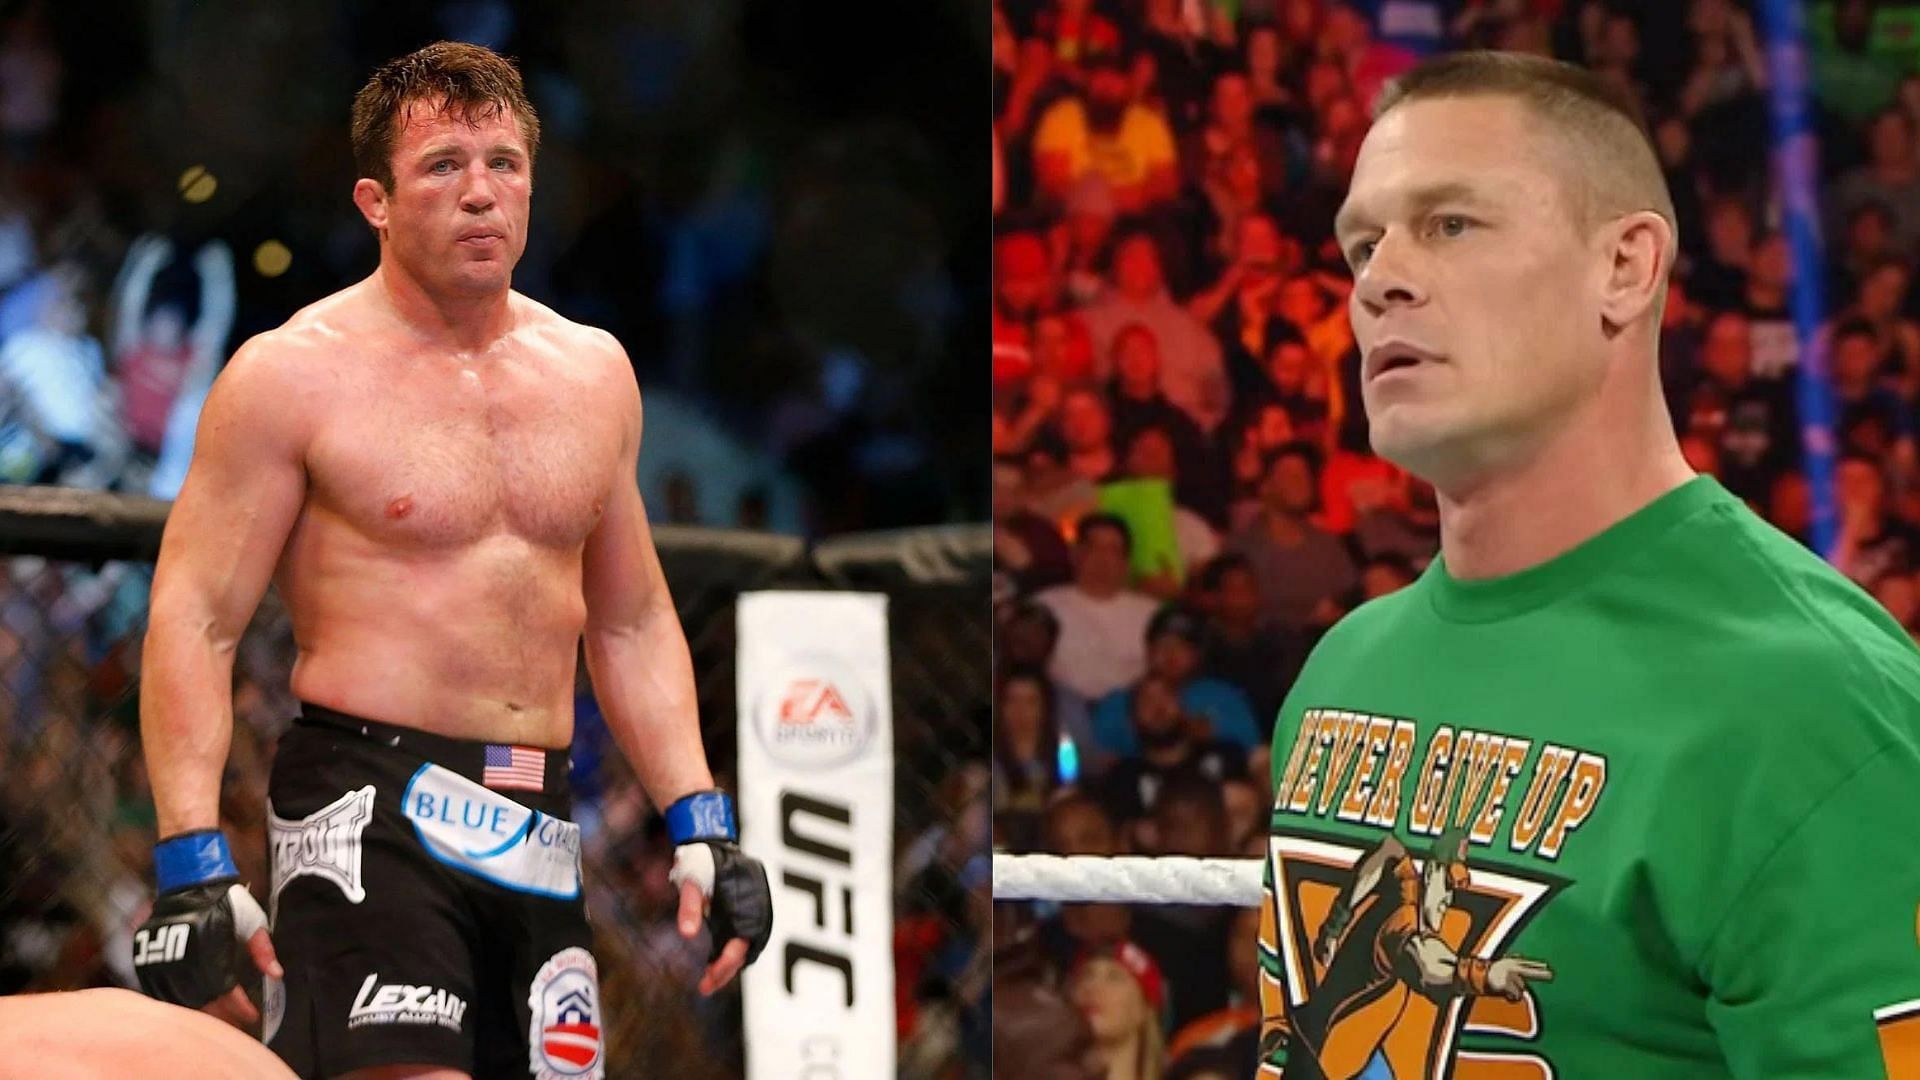 Chael Sonnen (L) was close to being a part of WrestleMania 32 with John Cena (R)